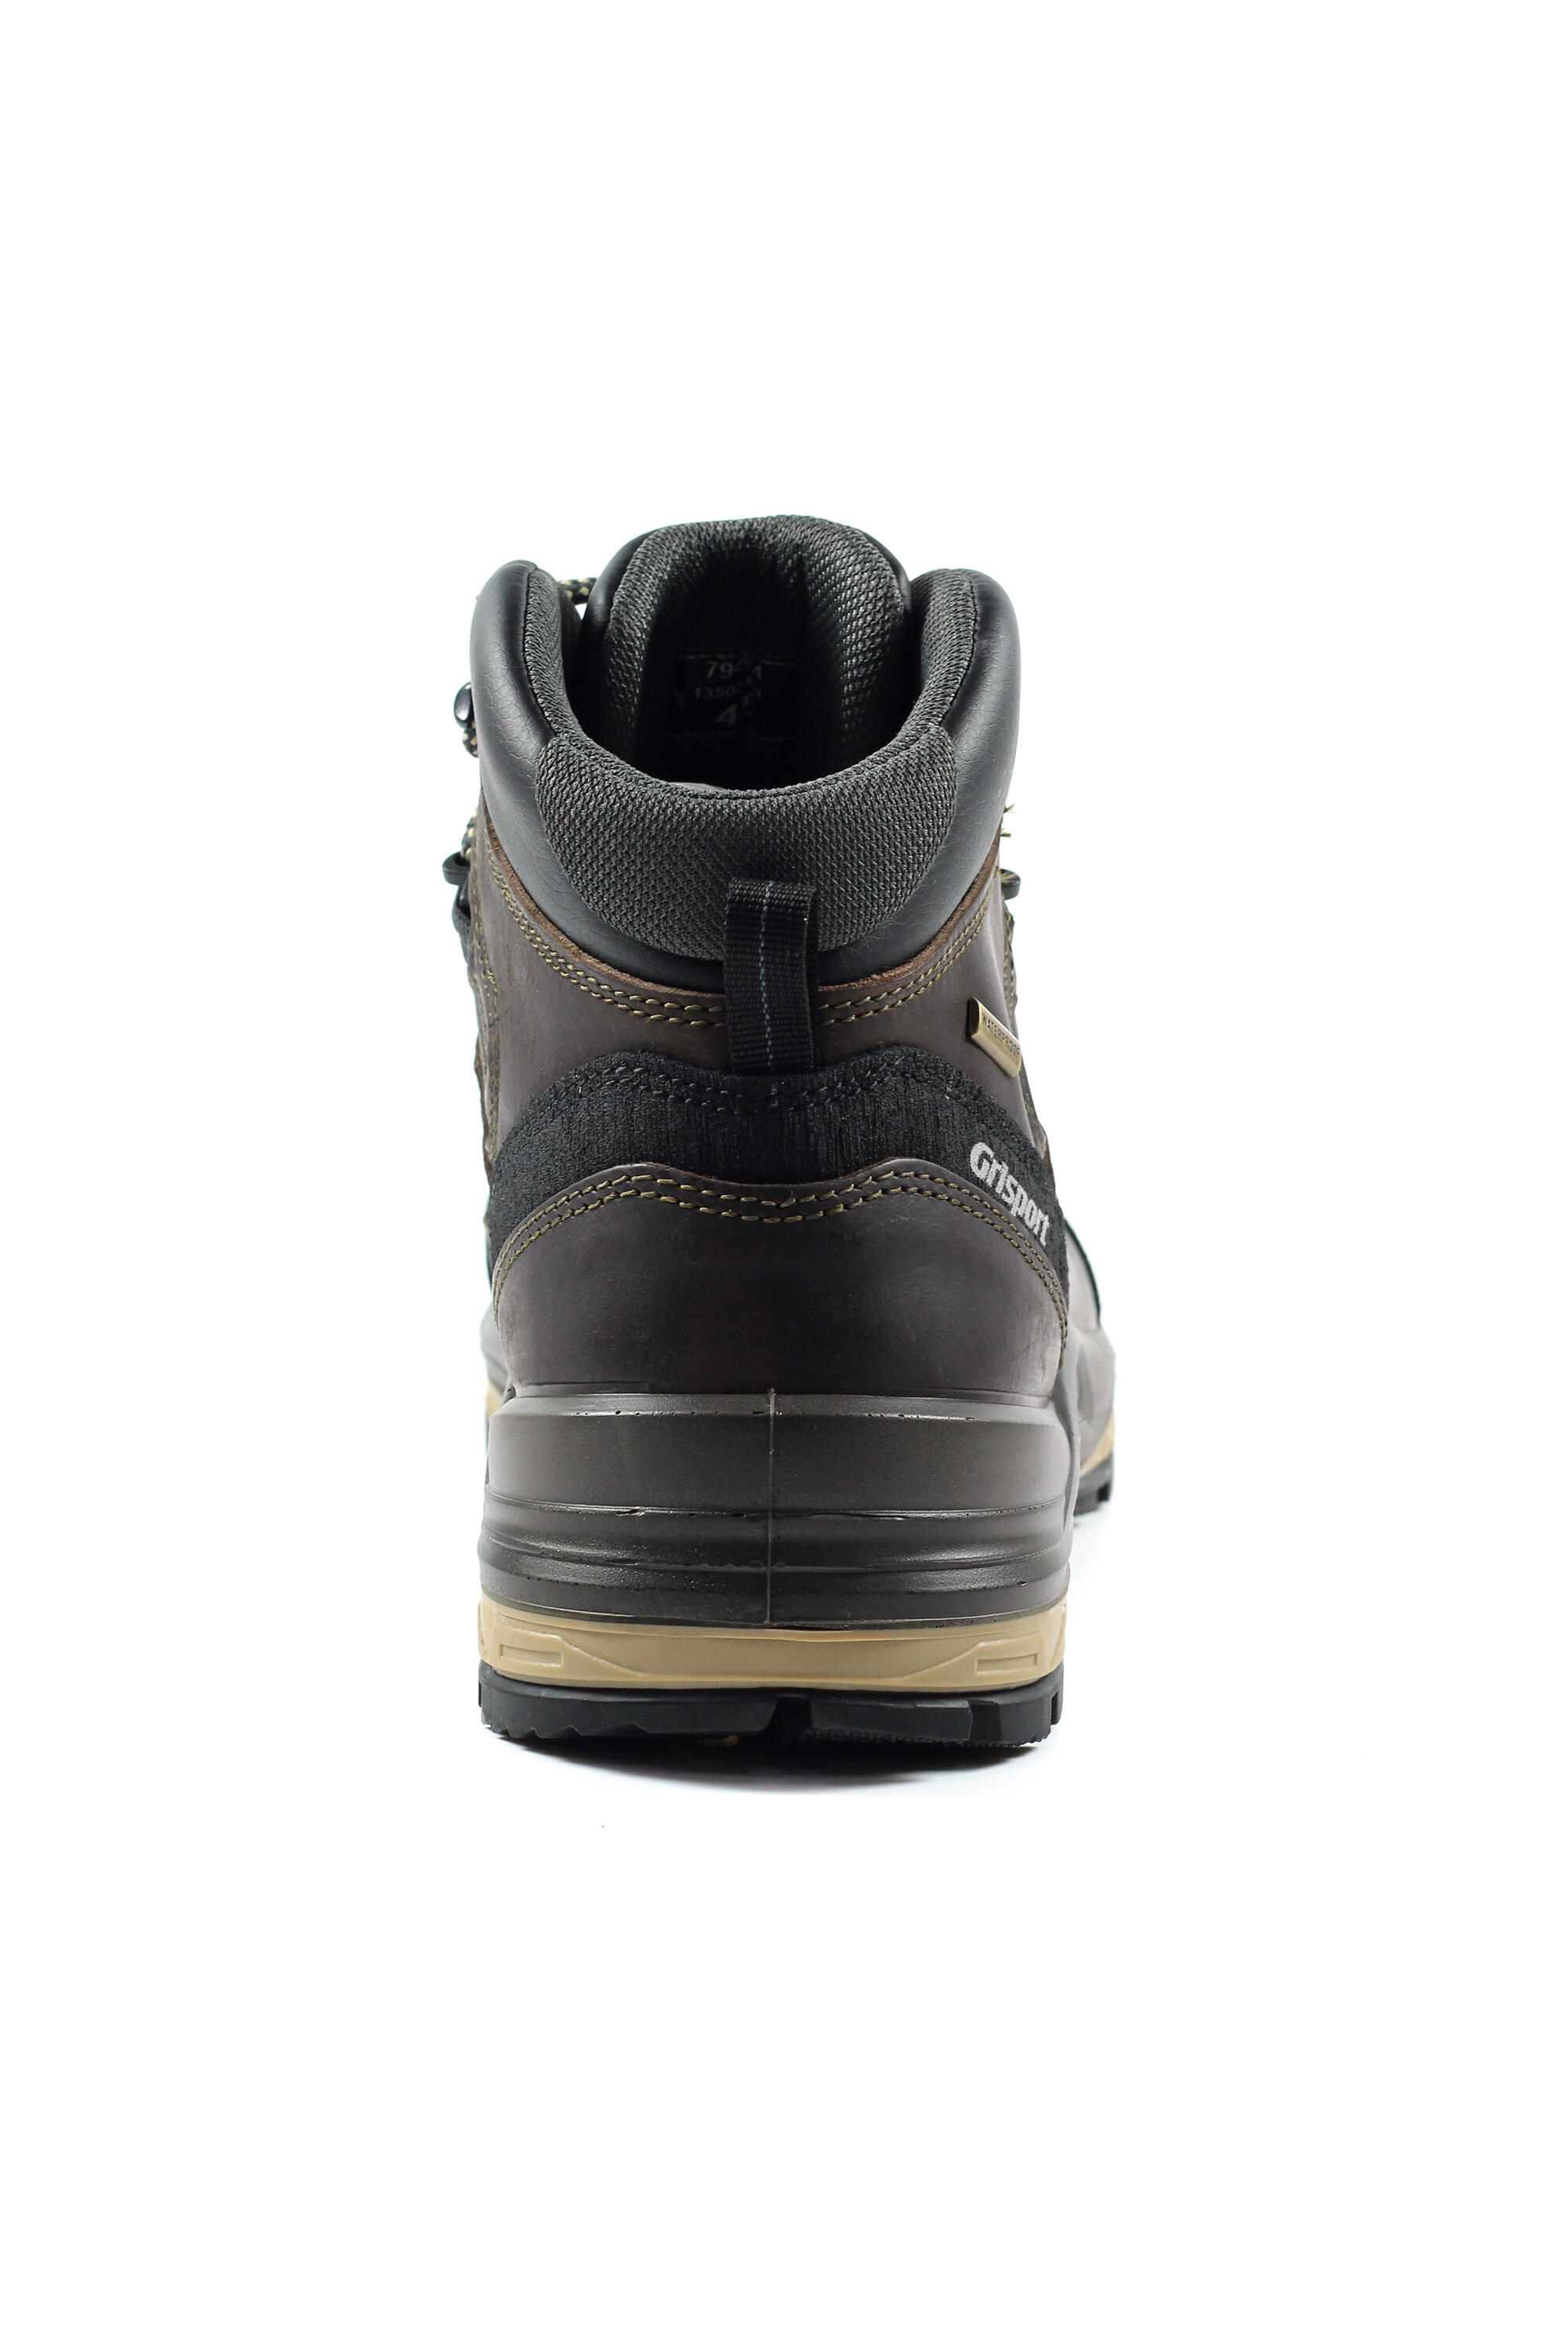 Fortress Brown Waterproof Hiking Boot 5/5